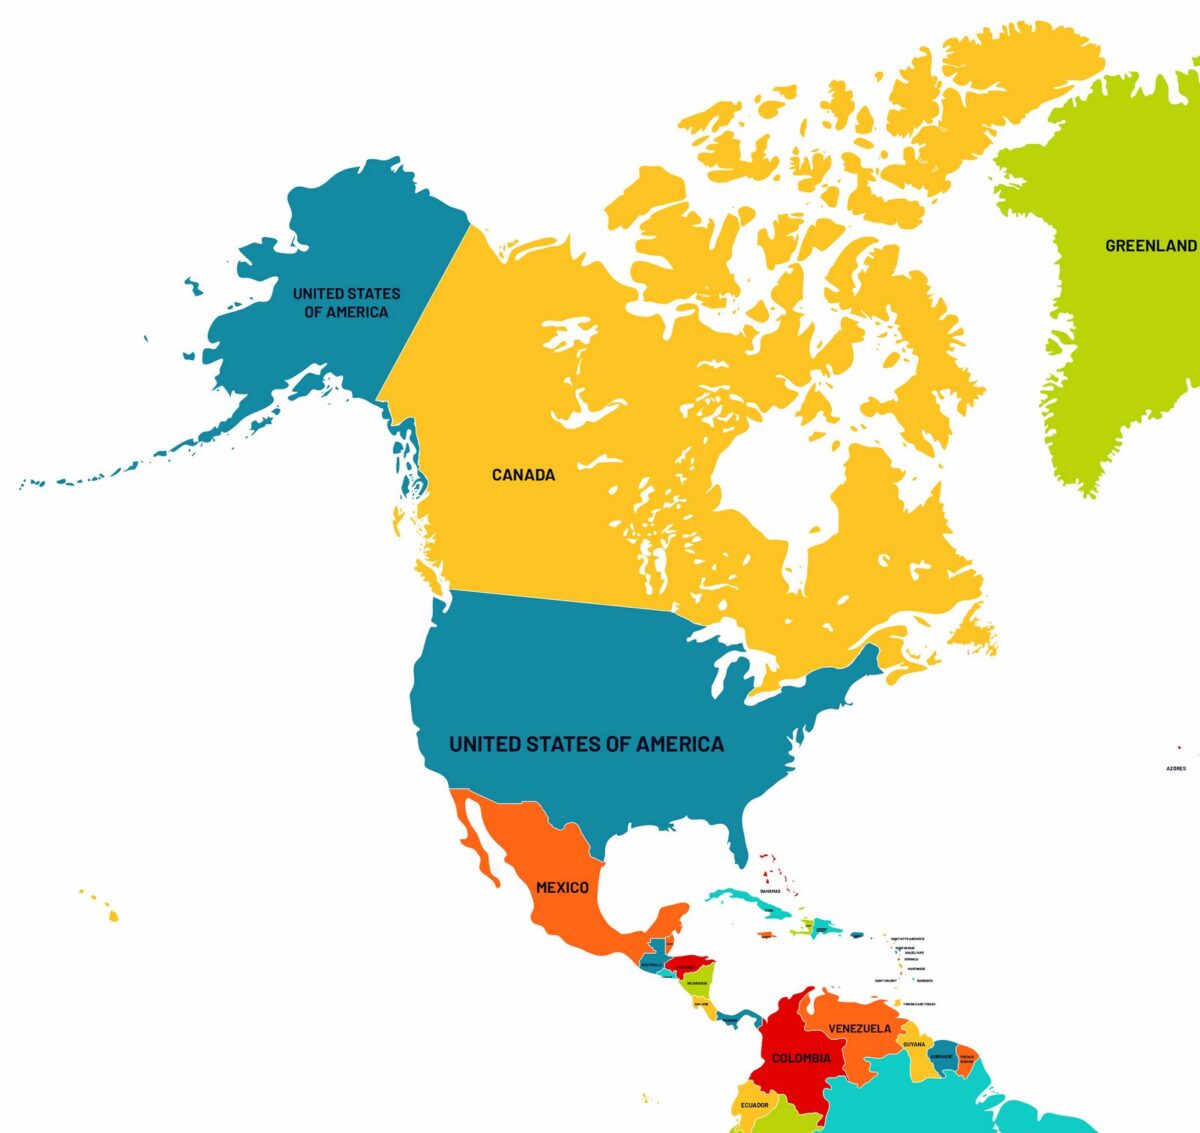 Map of North America from the 2020s